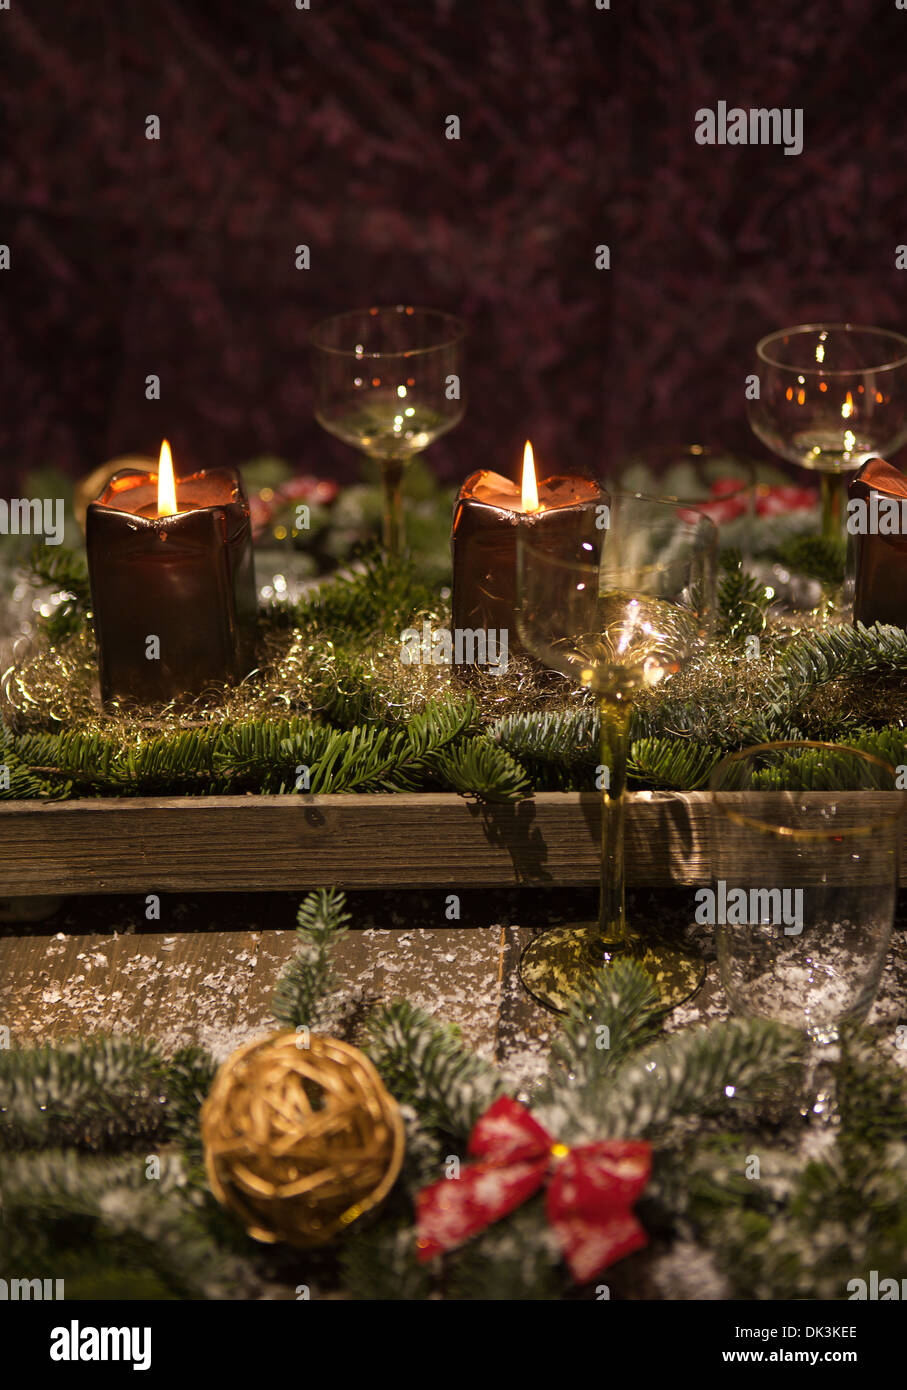 Wedding dinner table reception. Wedding table decoration - white branch  from a tree, crystal pendants, candles in glass spheres, on a white table  with Stock Photo - Alamy